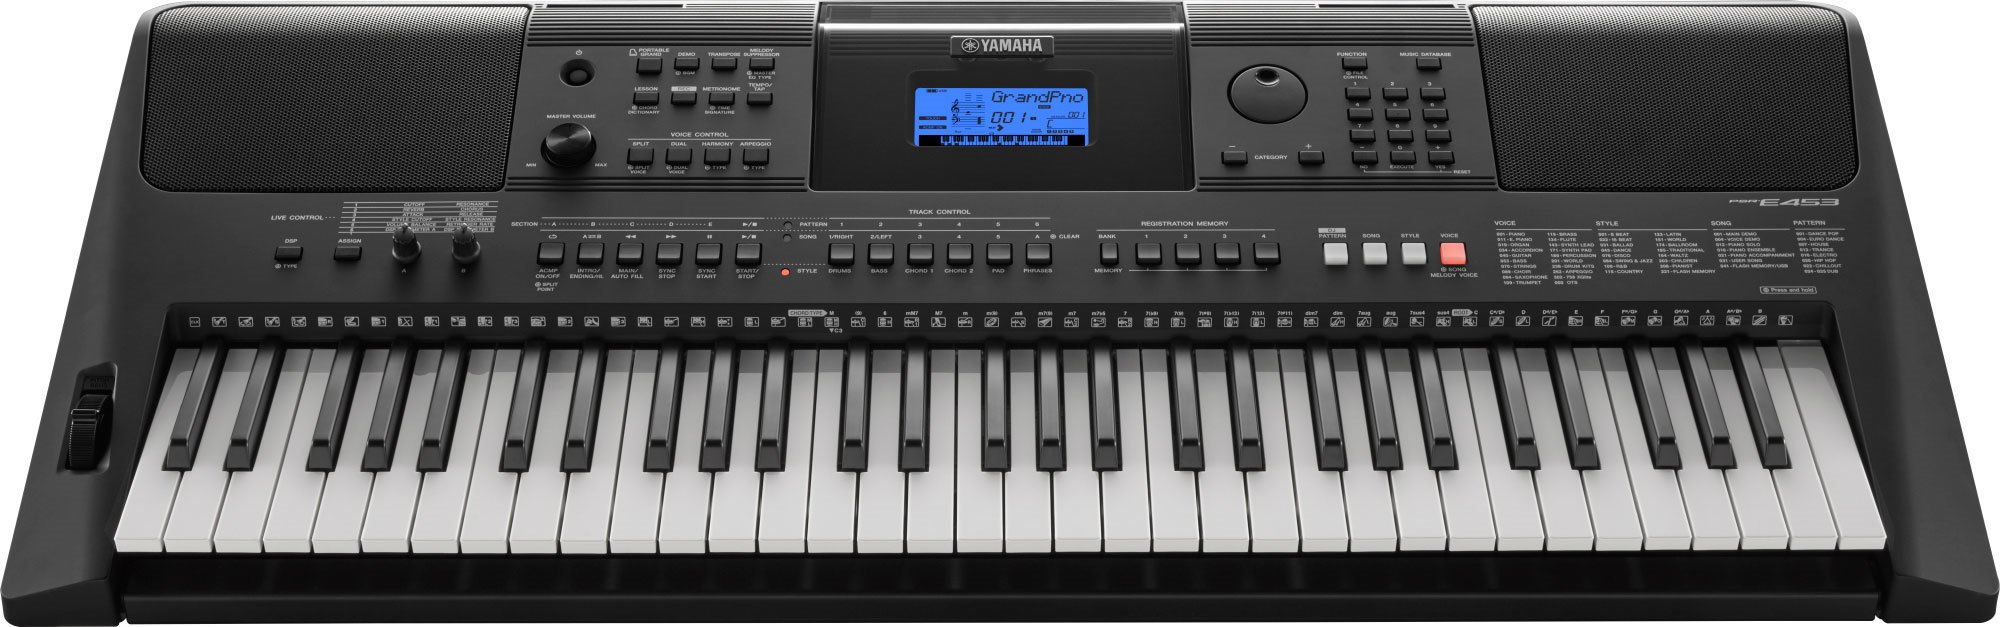 PSR-E453 - Overview - Portable Keyboards - Keyboard Instruments 